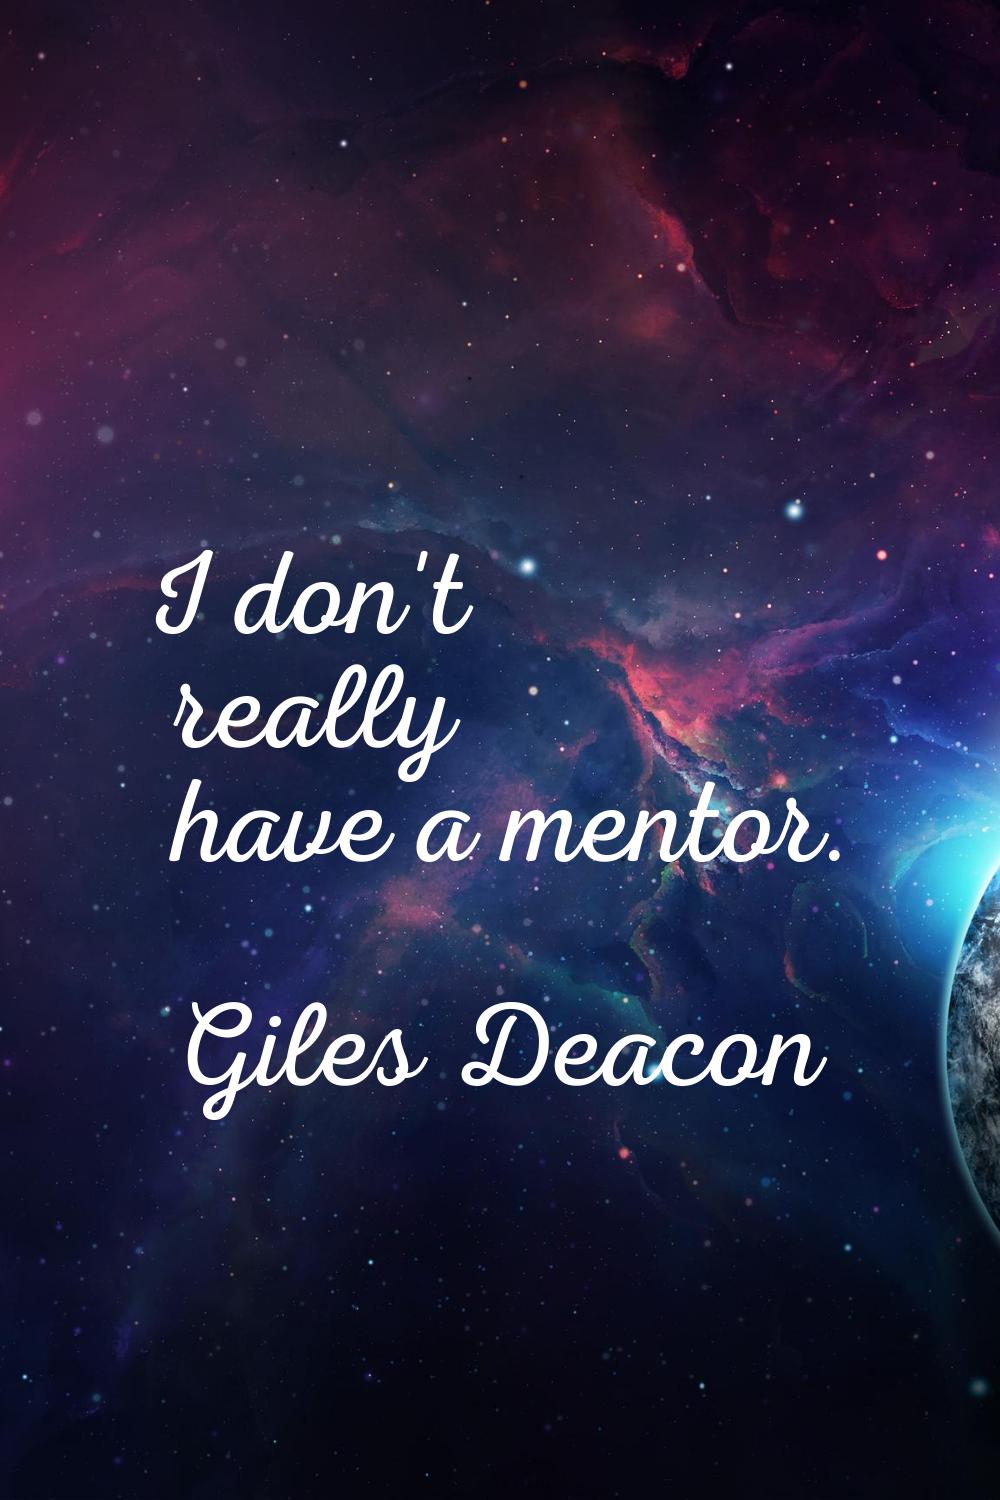 I don't really have a mentor.